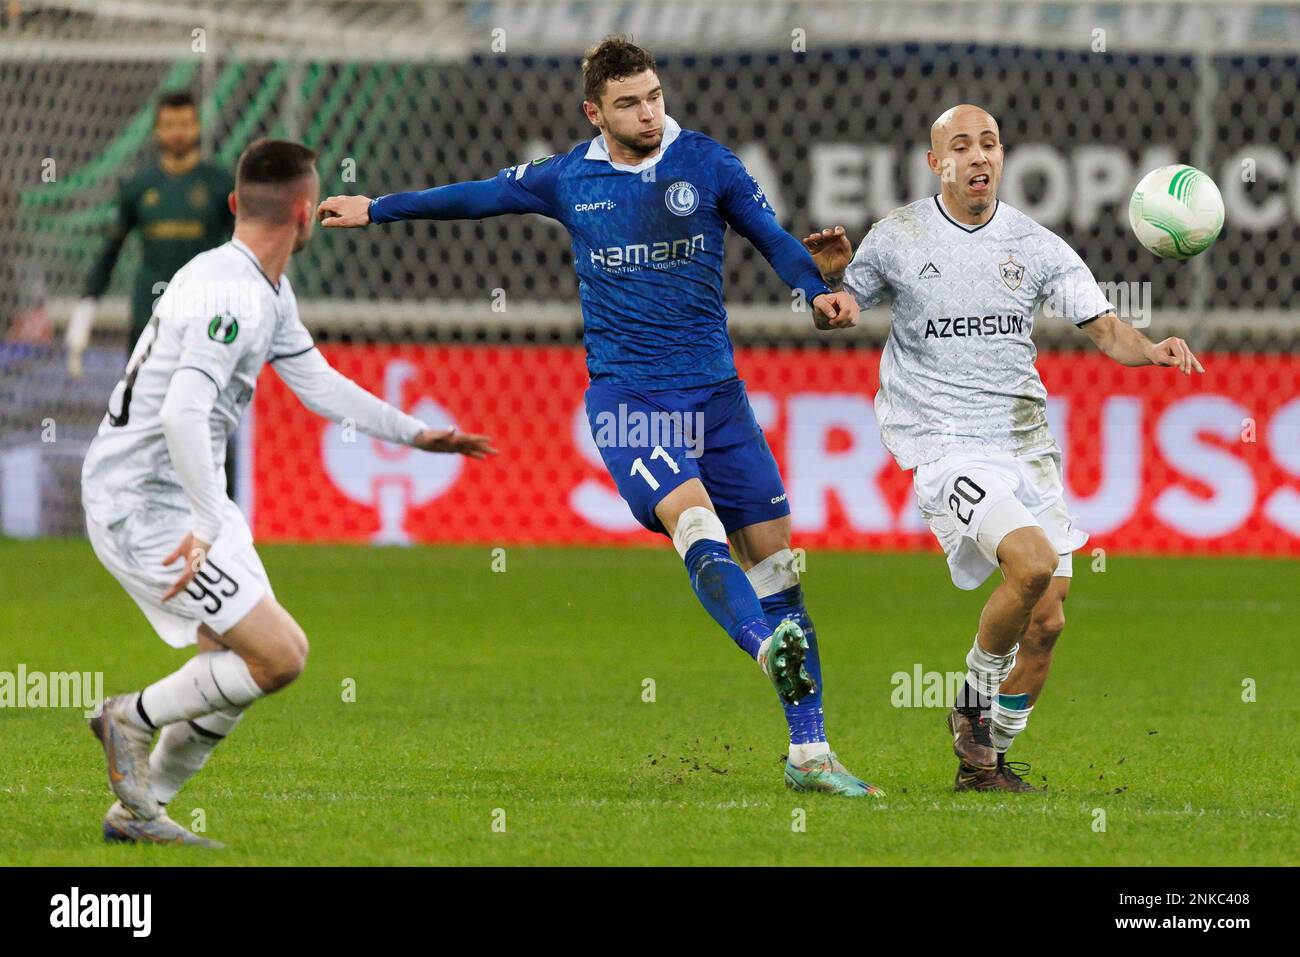 Gent, Belgium, 23/02/2023, Gent's Hugo Cuypers and Qarabag's Richard Almeida fight for the ball during a soccer game between Belgian KAA Gent and Azerbaijani Qarabag FK, Thursday 23 February 2023 in Gent, the return leg of the play-off round of the UEFA Europa Conference League competition. Qarabag won the first leg with a 1-0 score. BELGA PHOTO KURT DESPLENTER Stock Photo